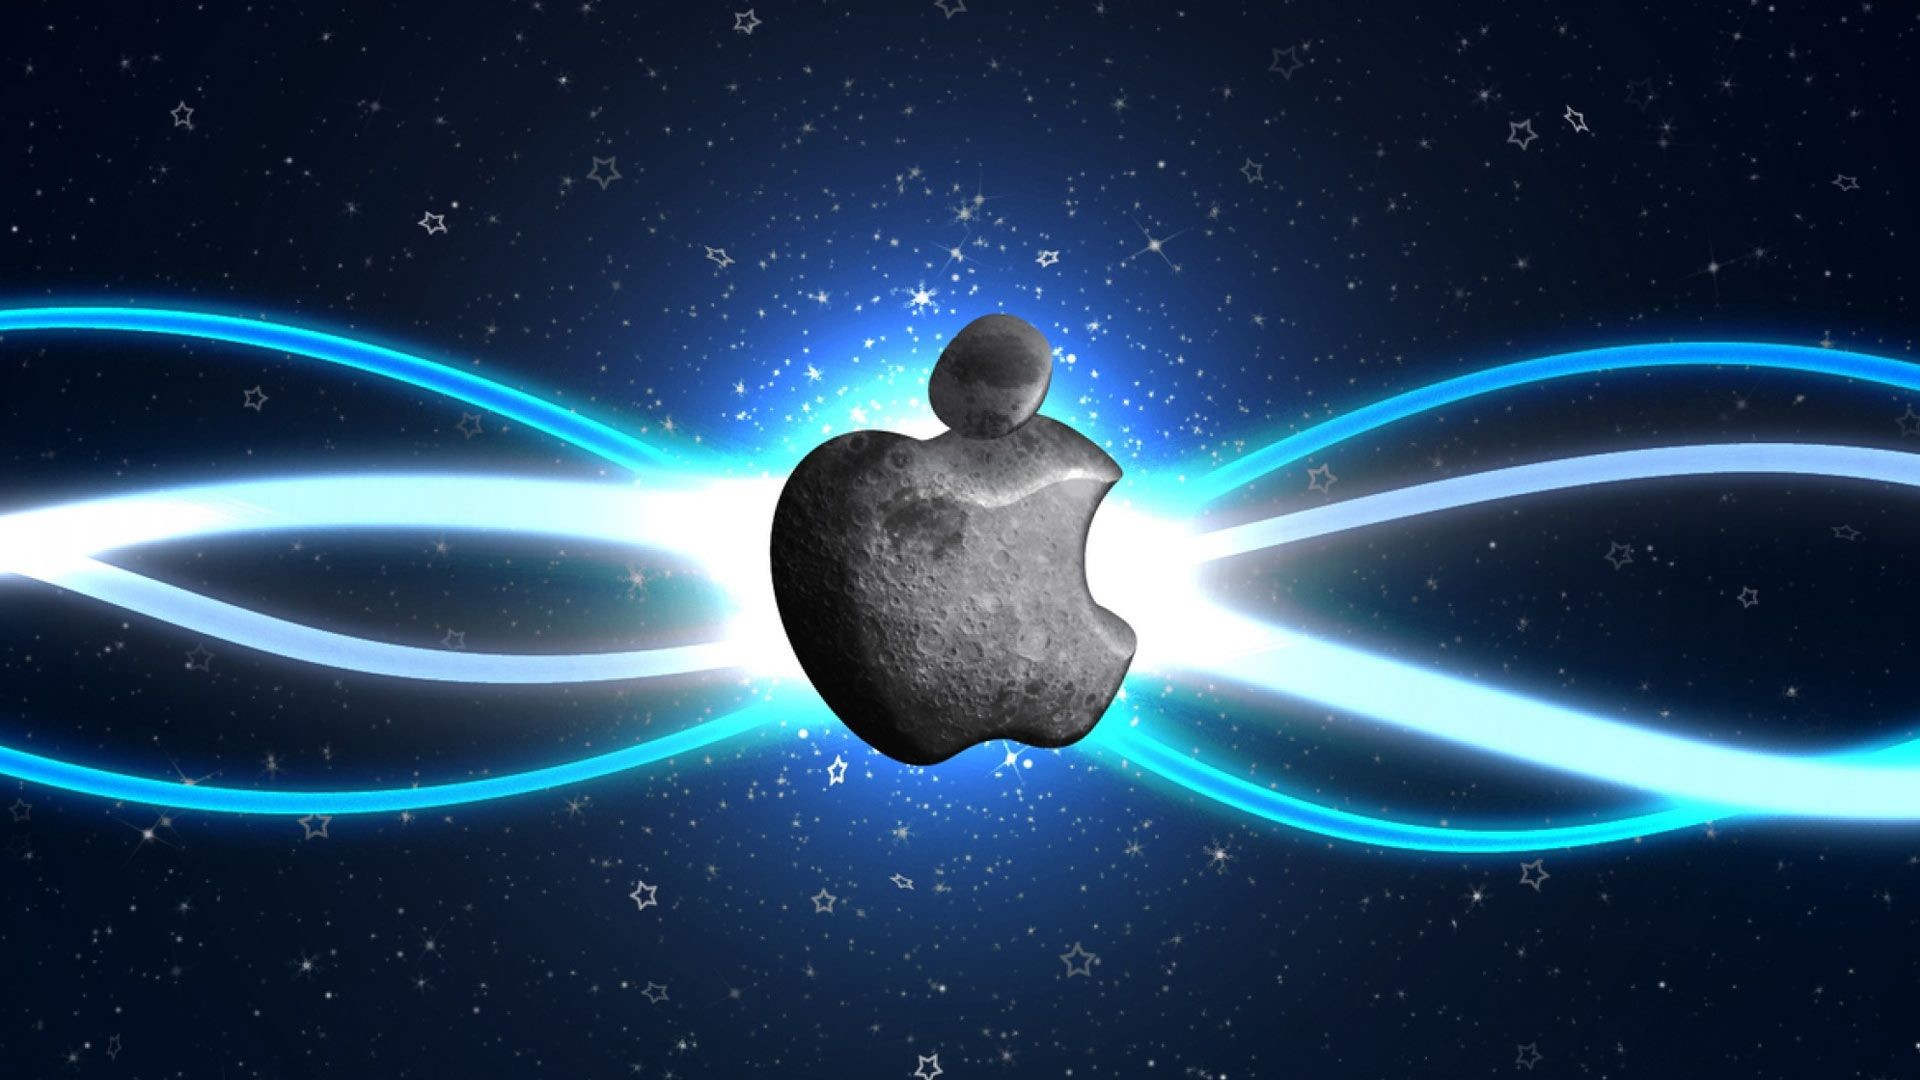 1920x1080 Cool apple logo wallpaper – Free full hd wallpapers for 1080p .